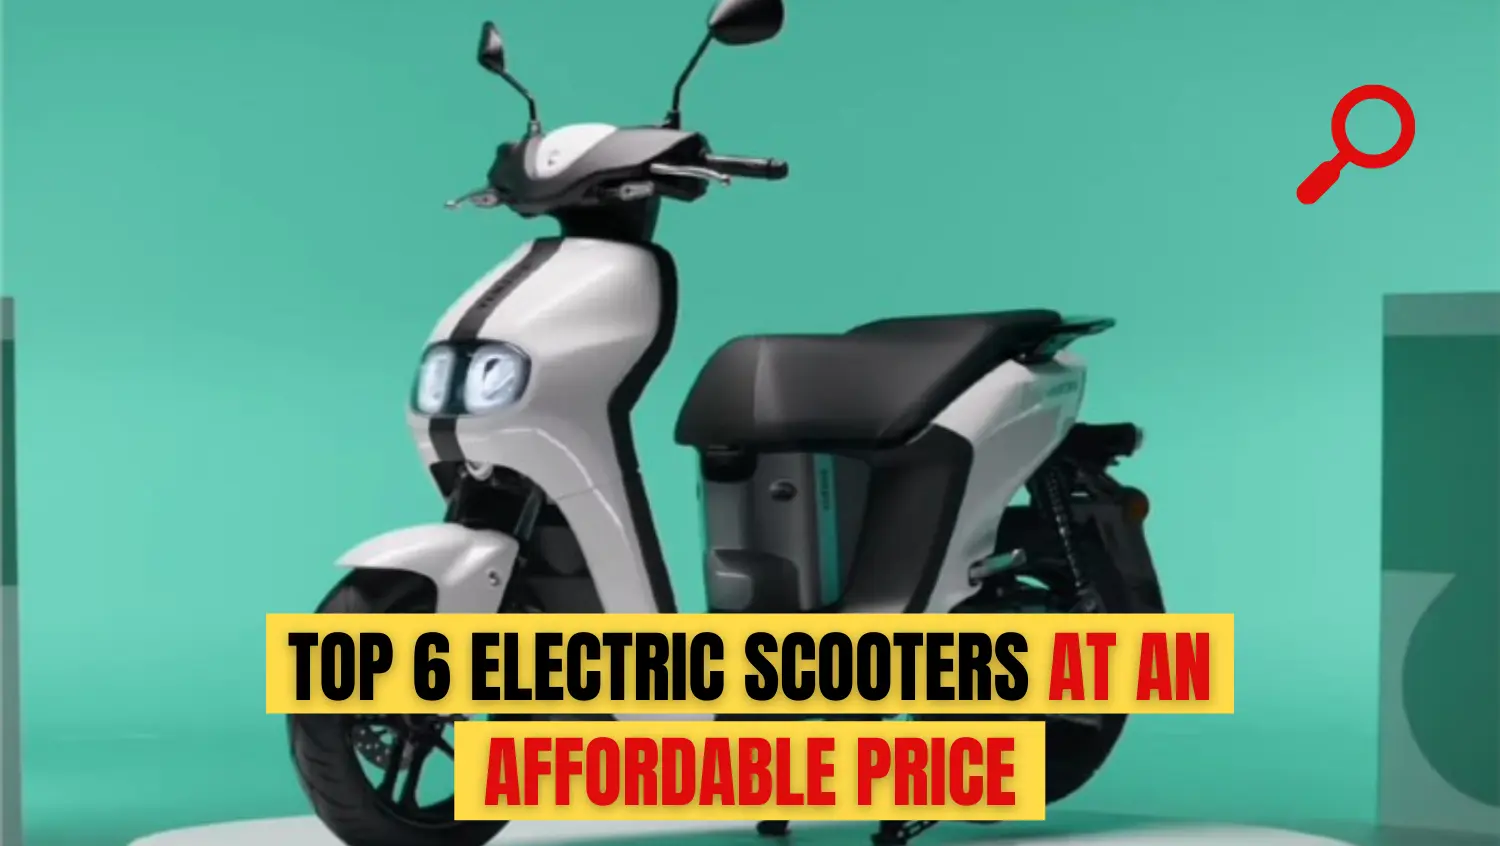 Top 6 Electric Scooters at an affordable price